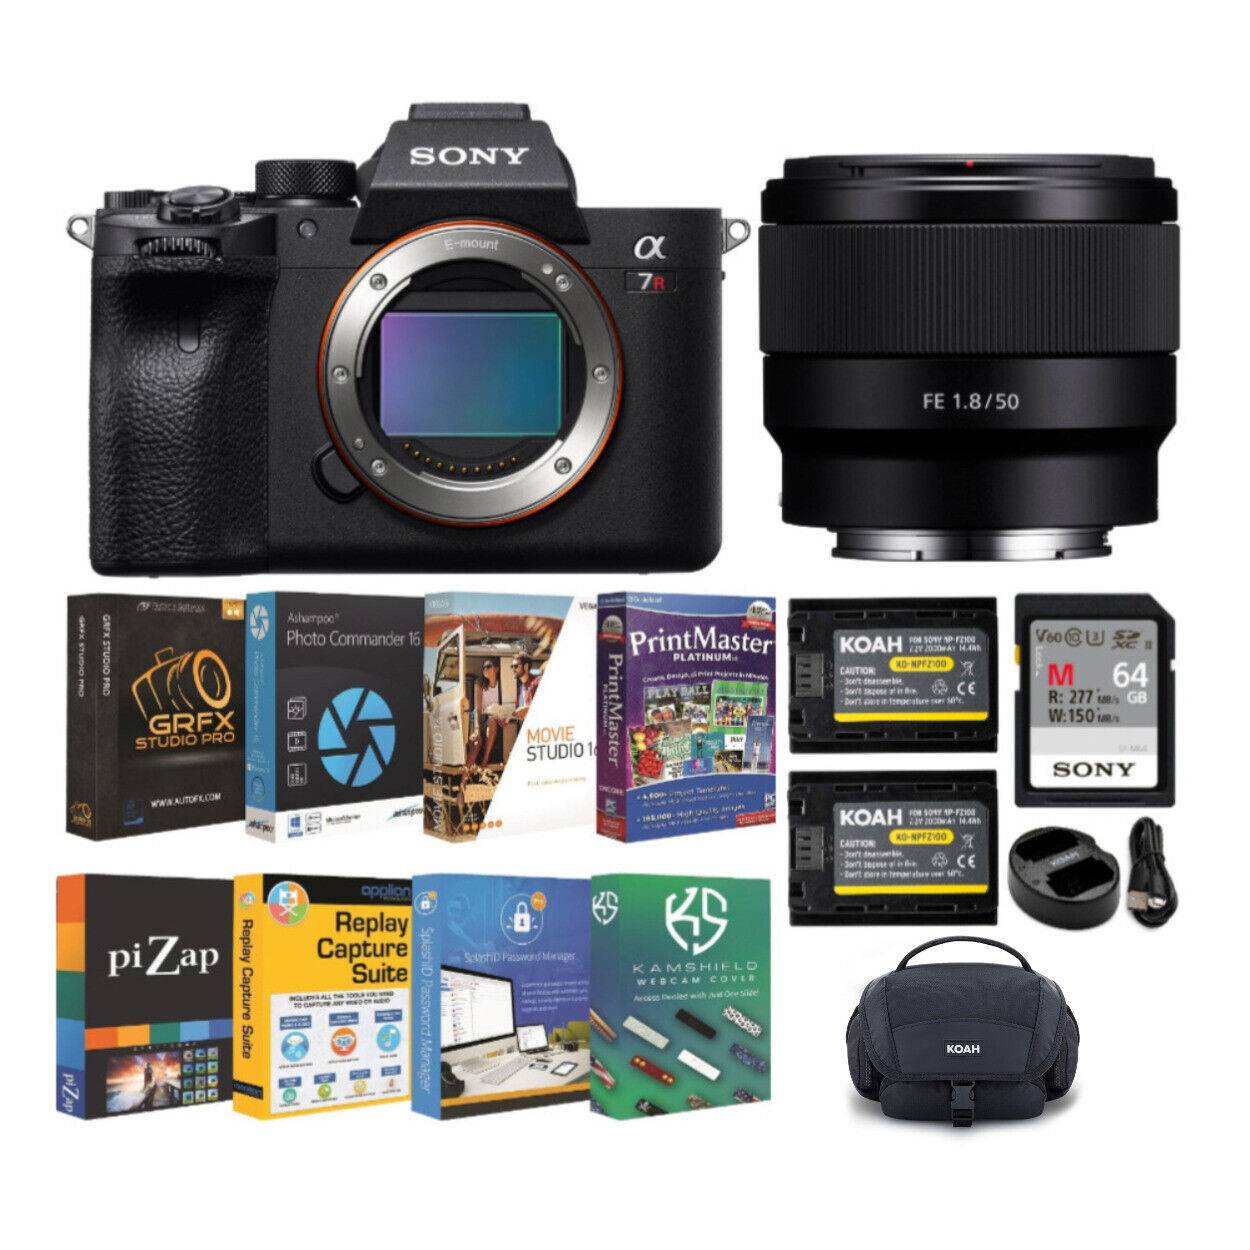 Nikon Z7 II Mirrorless Camera with 24-70mm f/4 Lens (1656) + FTZ II Adapter  + 64GB Memory Card + Filter Kit + Wide Angle Lens + Color Filter Kit + Bag